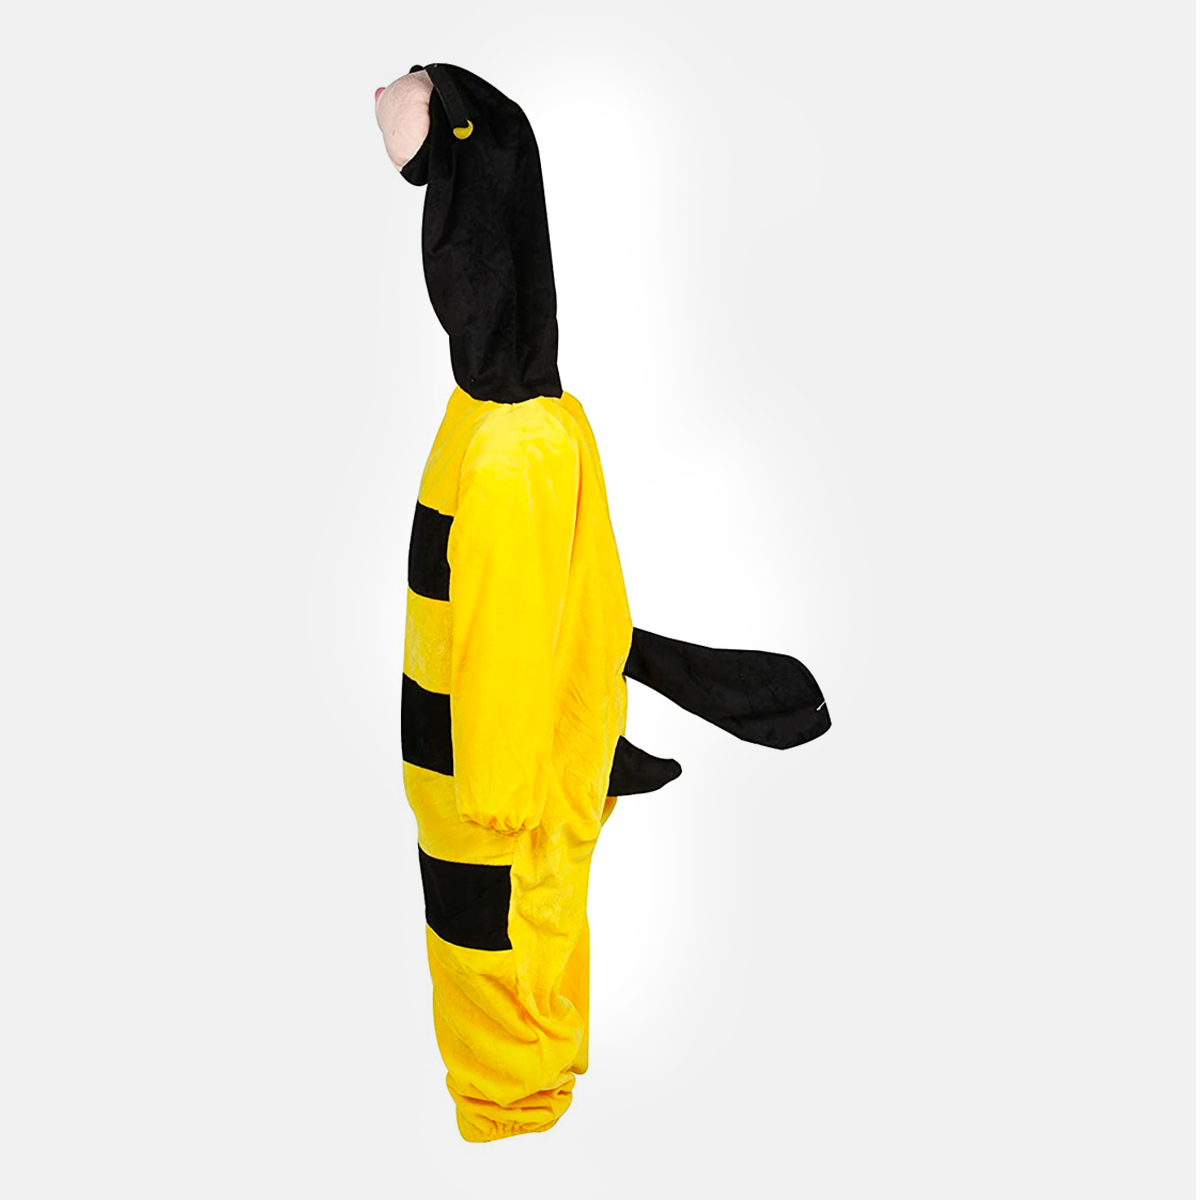 Kids Animal Costume - Get Best Price from Manufacturers & Suppliers in India